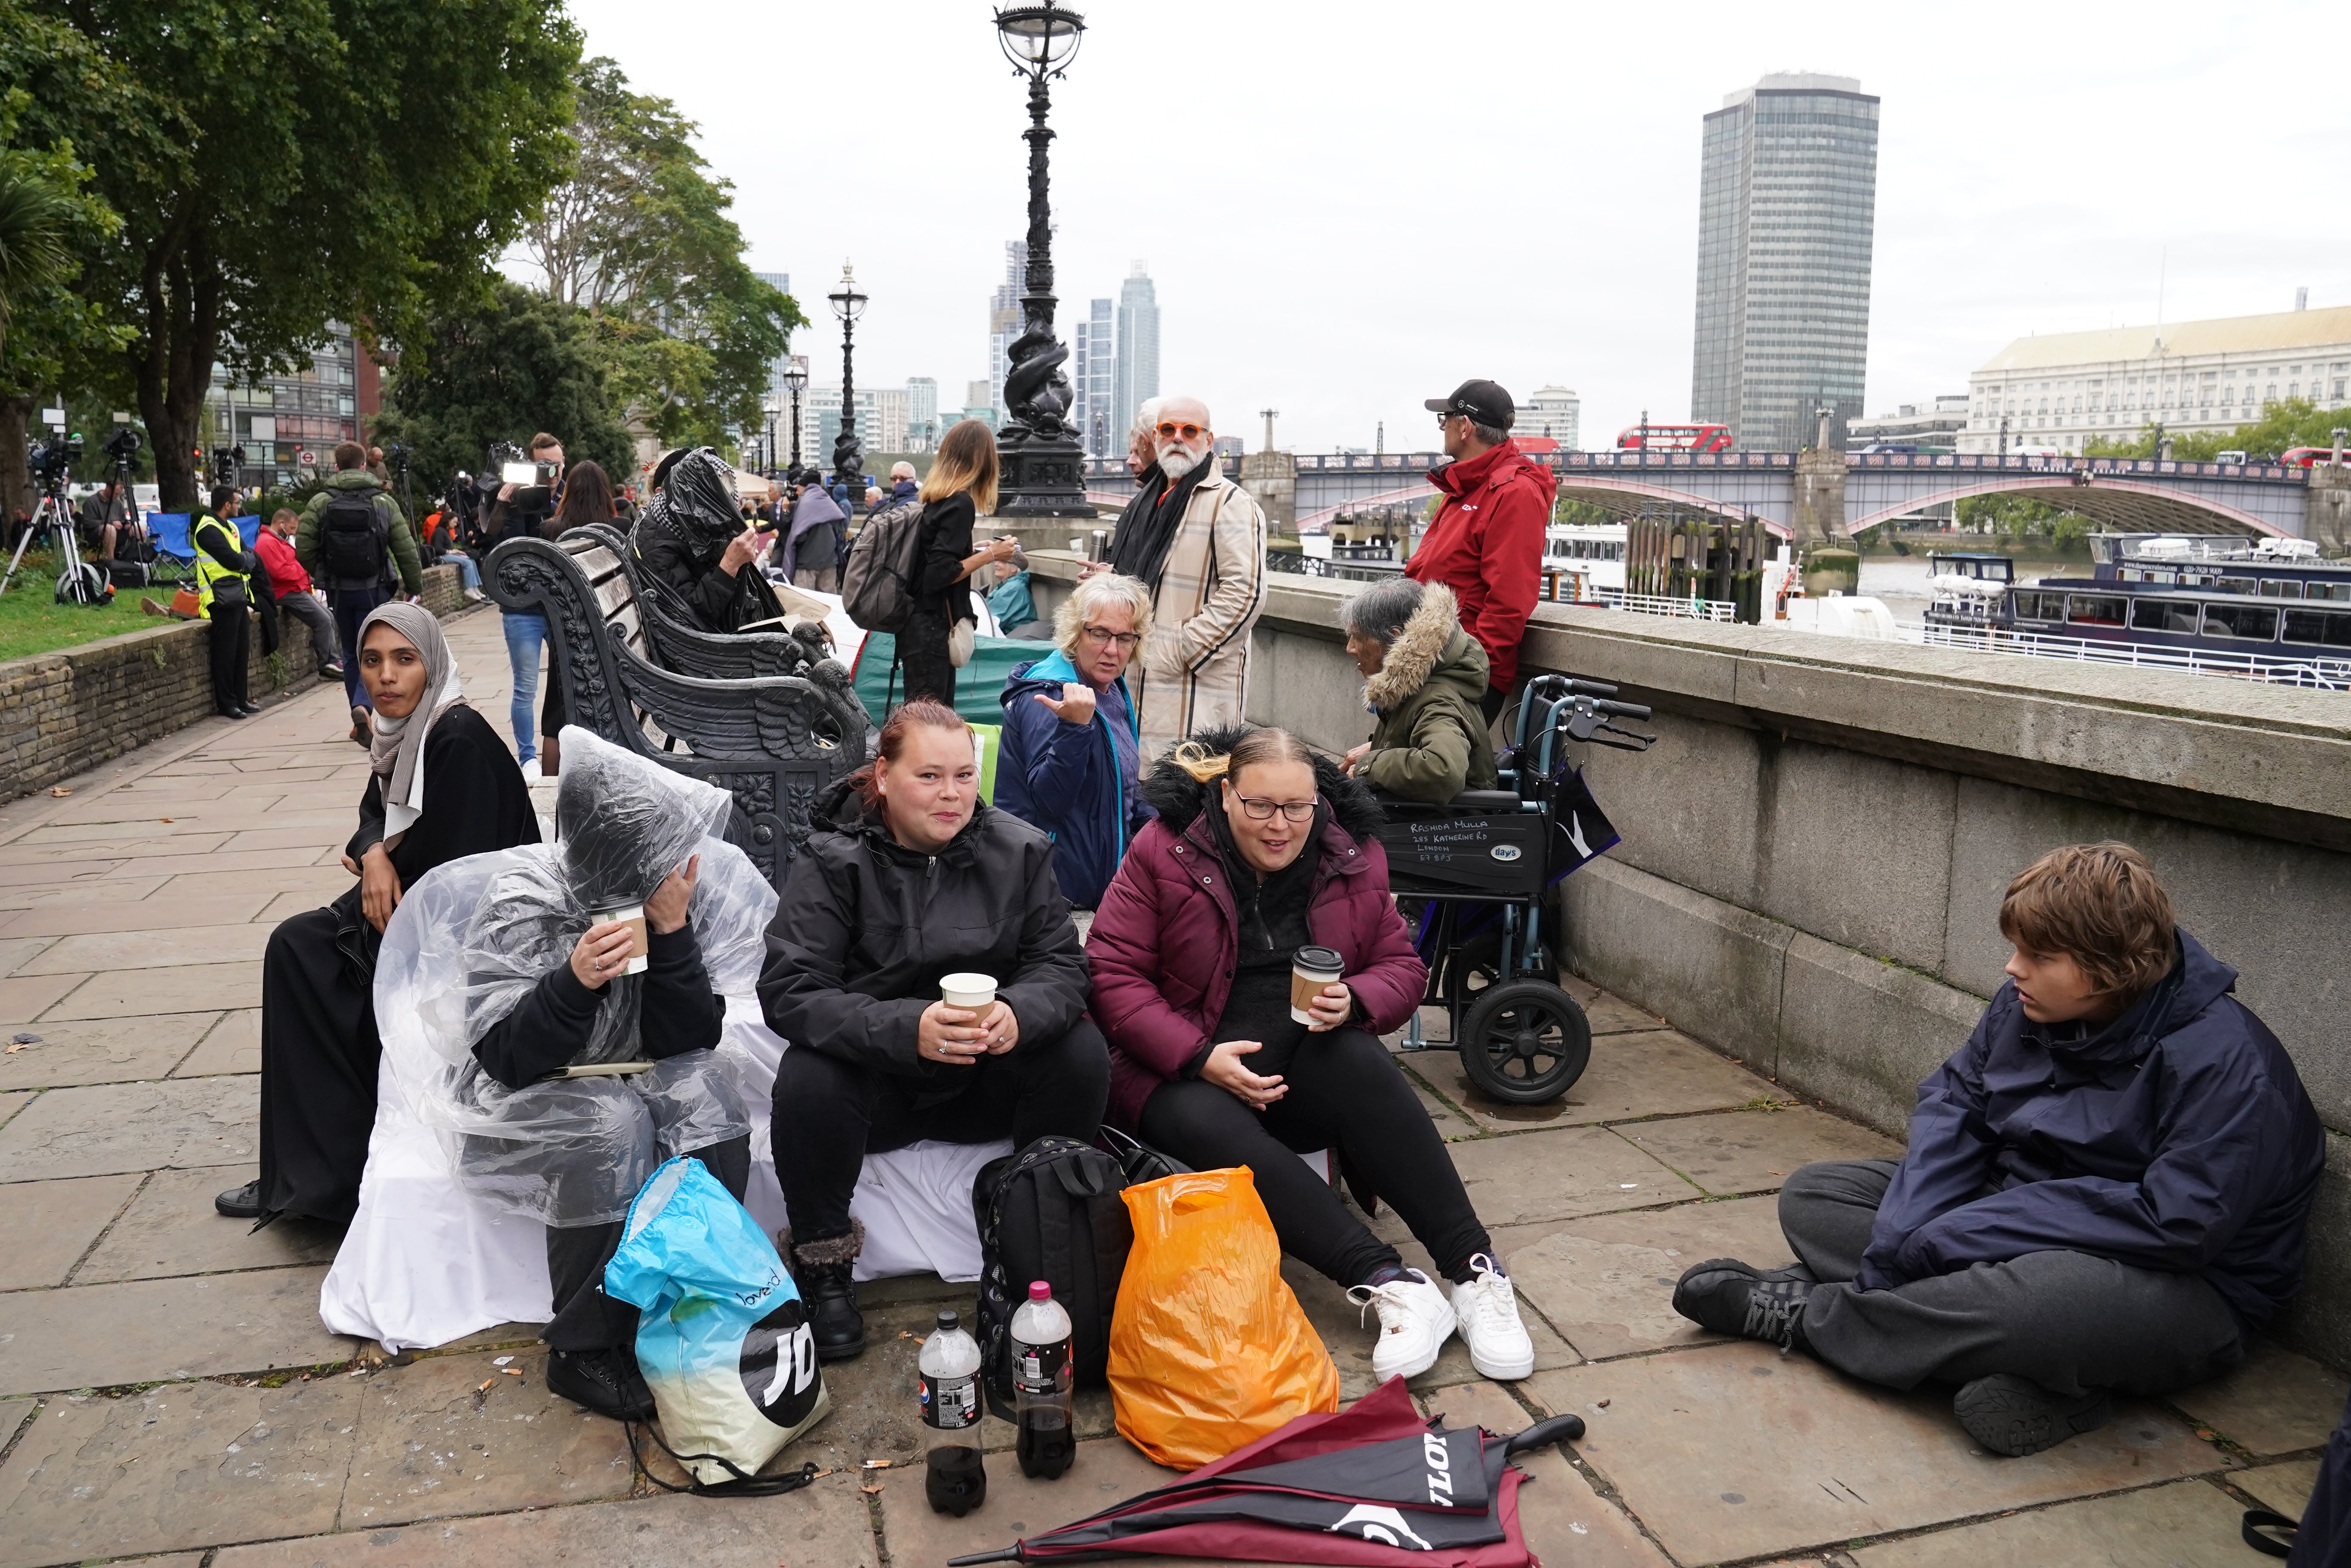 Members of the public join the queue on the South Bank (Stefan Rousseau/PA